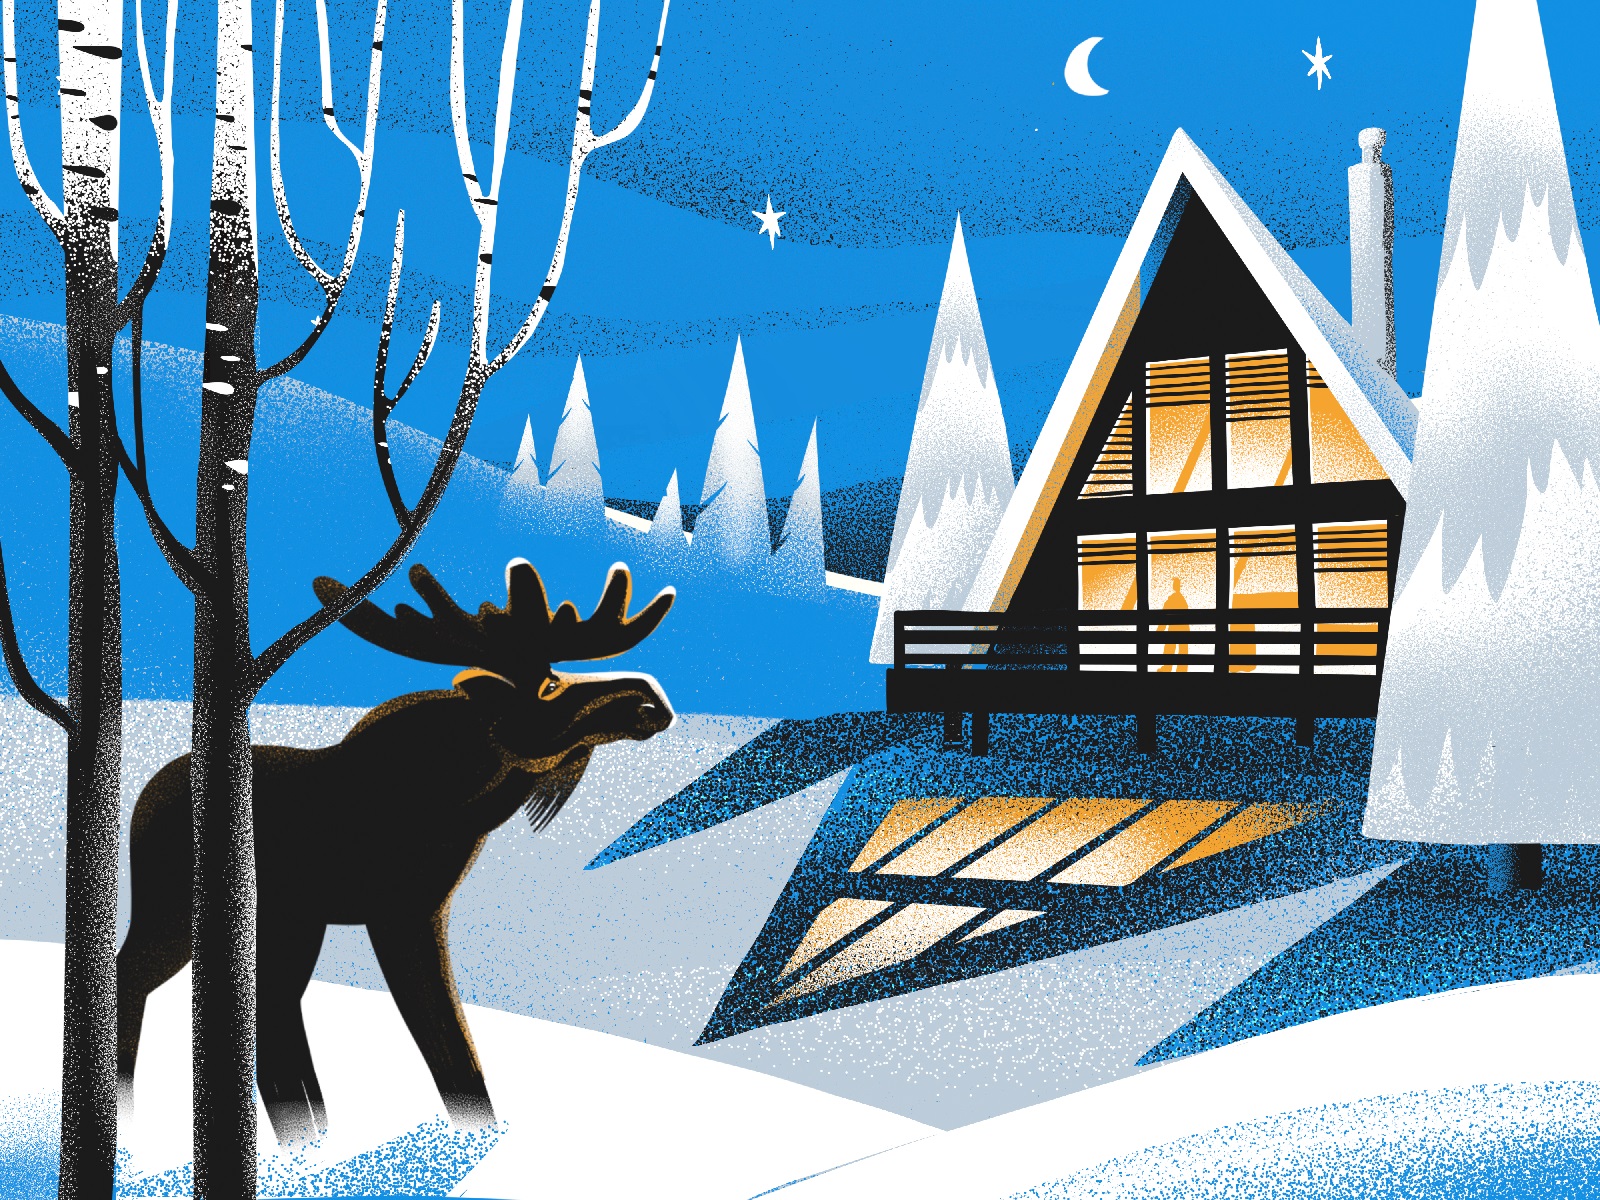 Snowy Art: Fresh Collection of Winter Illustrations